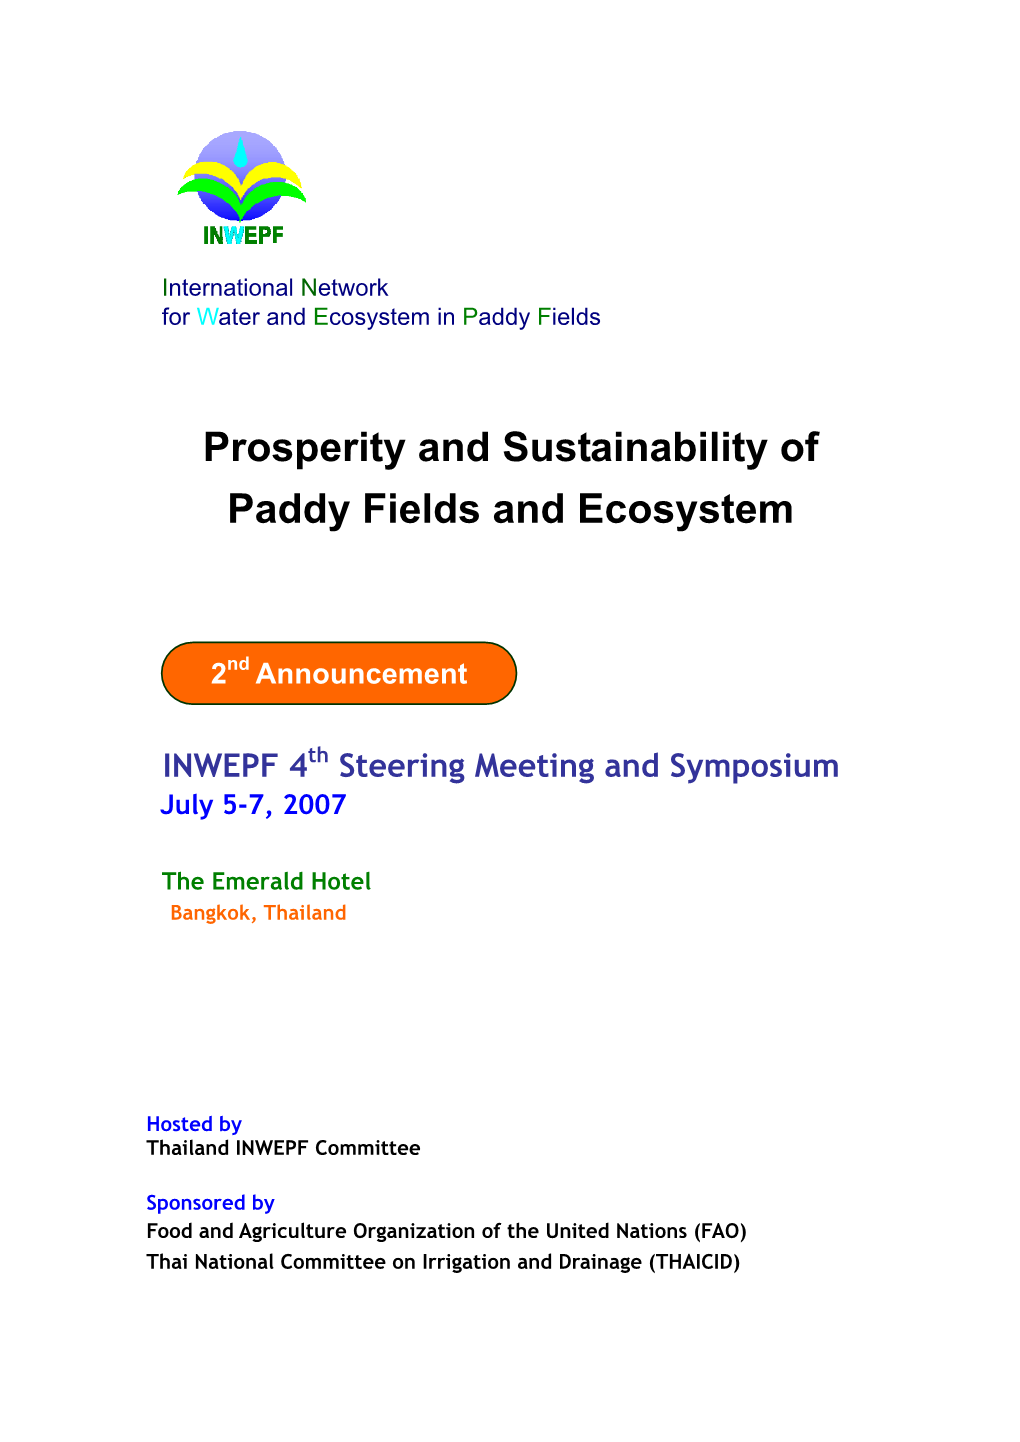 Prosperity and Sustainability of Paddy Fields and Ecosystem